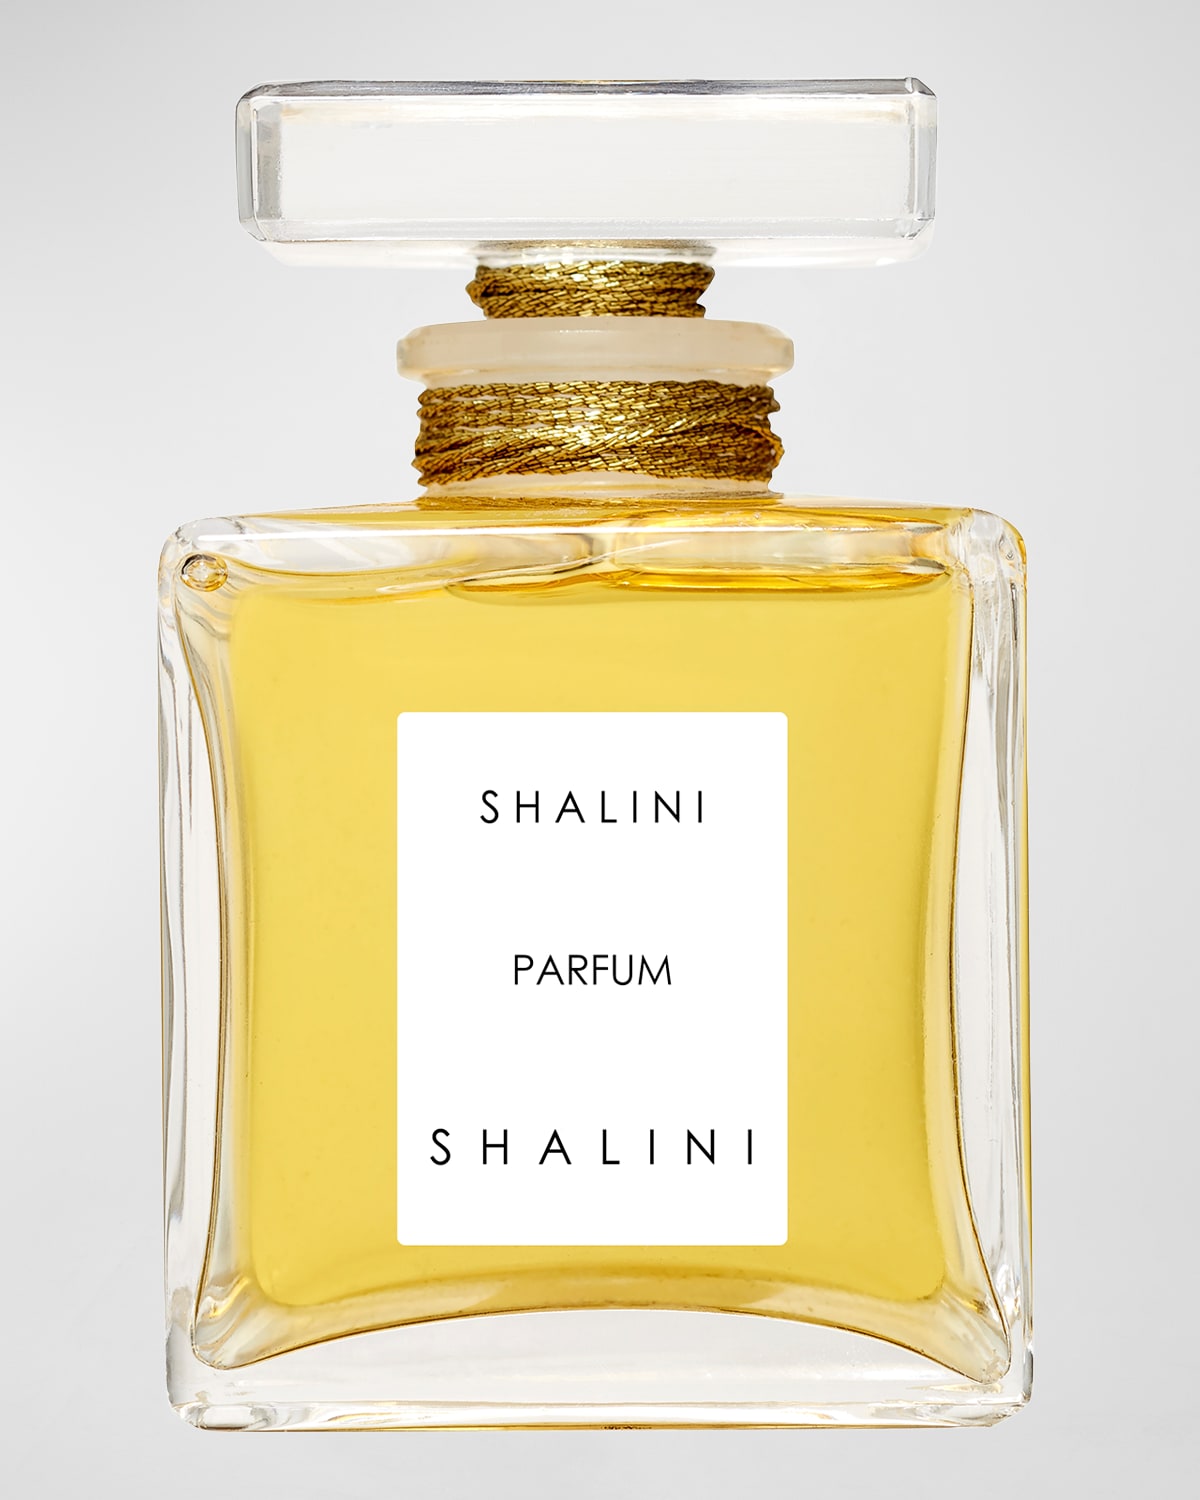 Shop Shalini Parfum Cubique Glass Bottle With Glass Stopper Sealed With Gold Thread, 1.7 Oz./ 50 ml